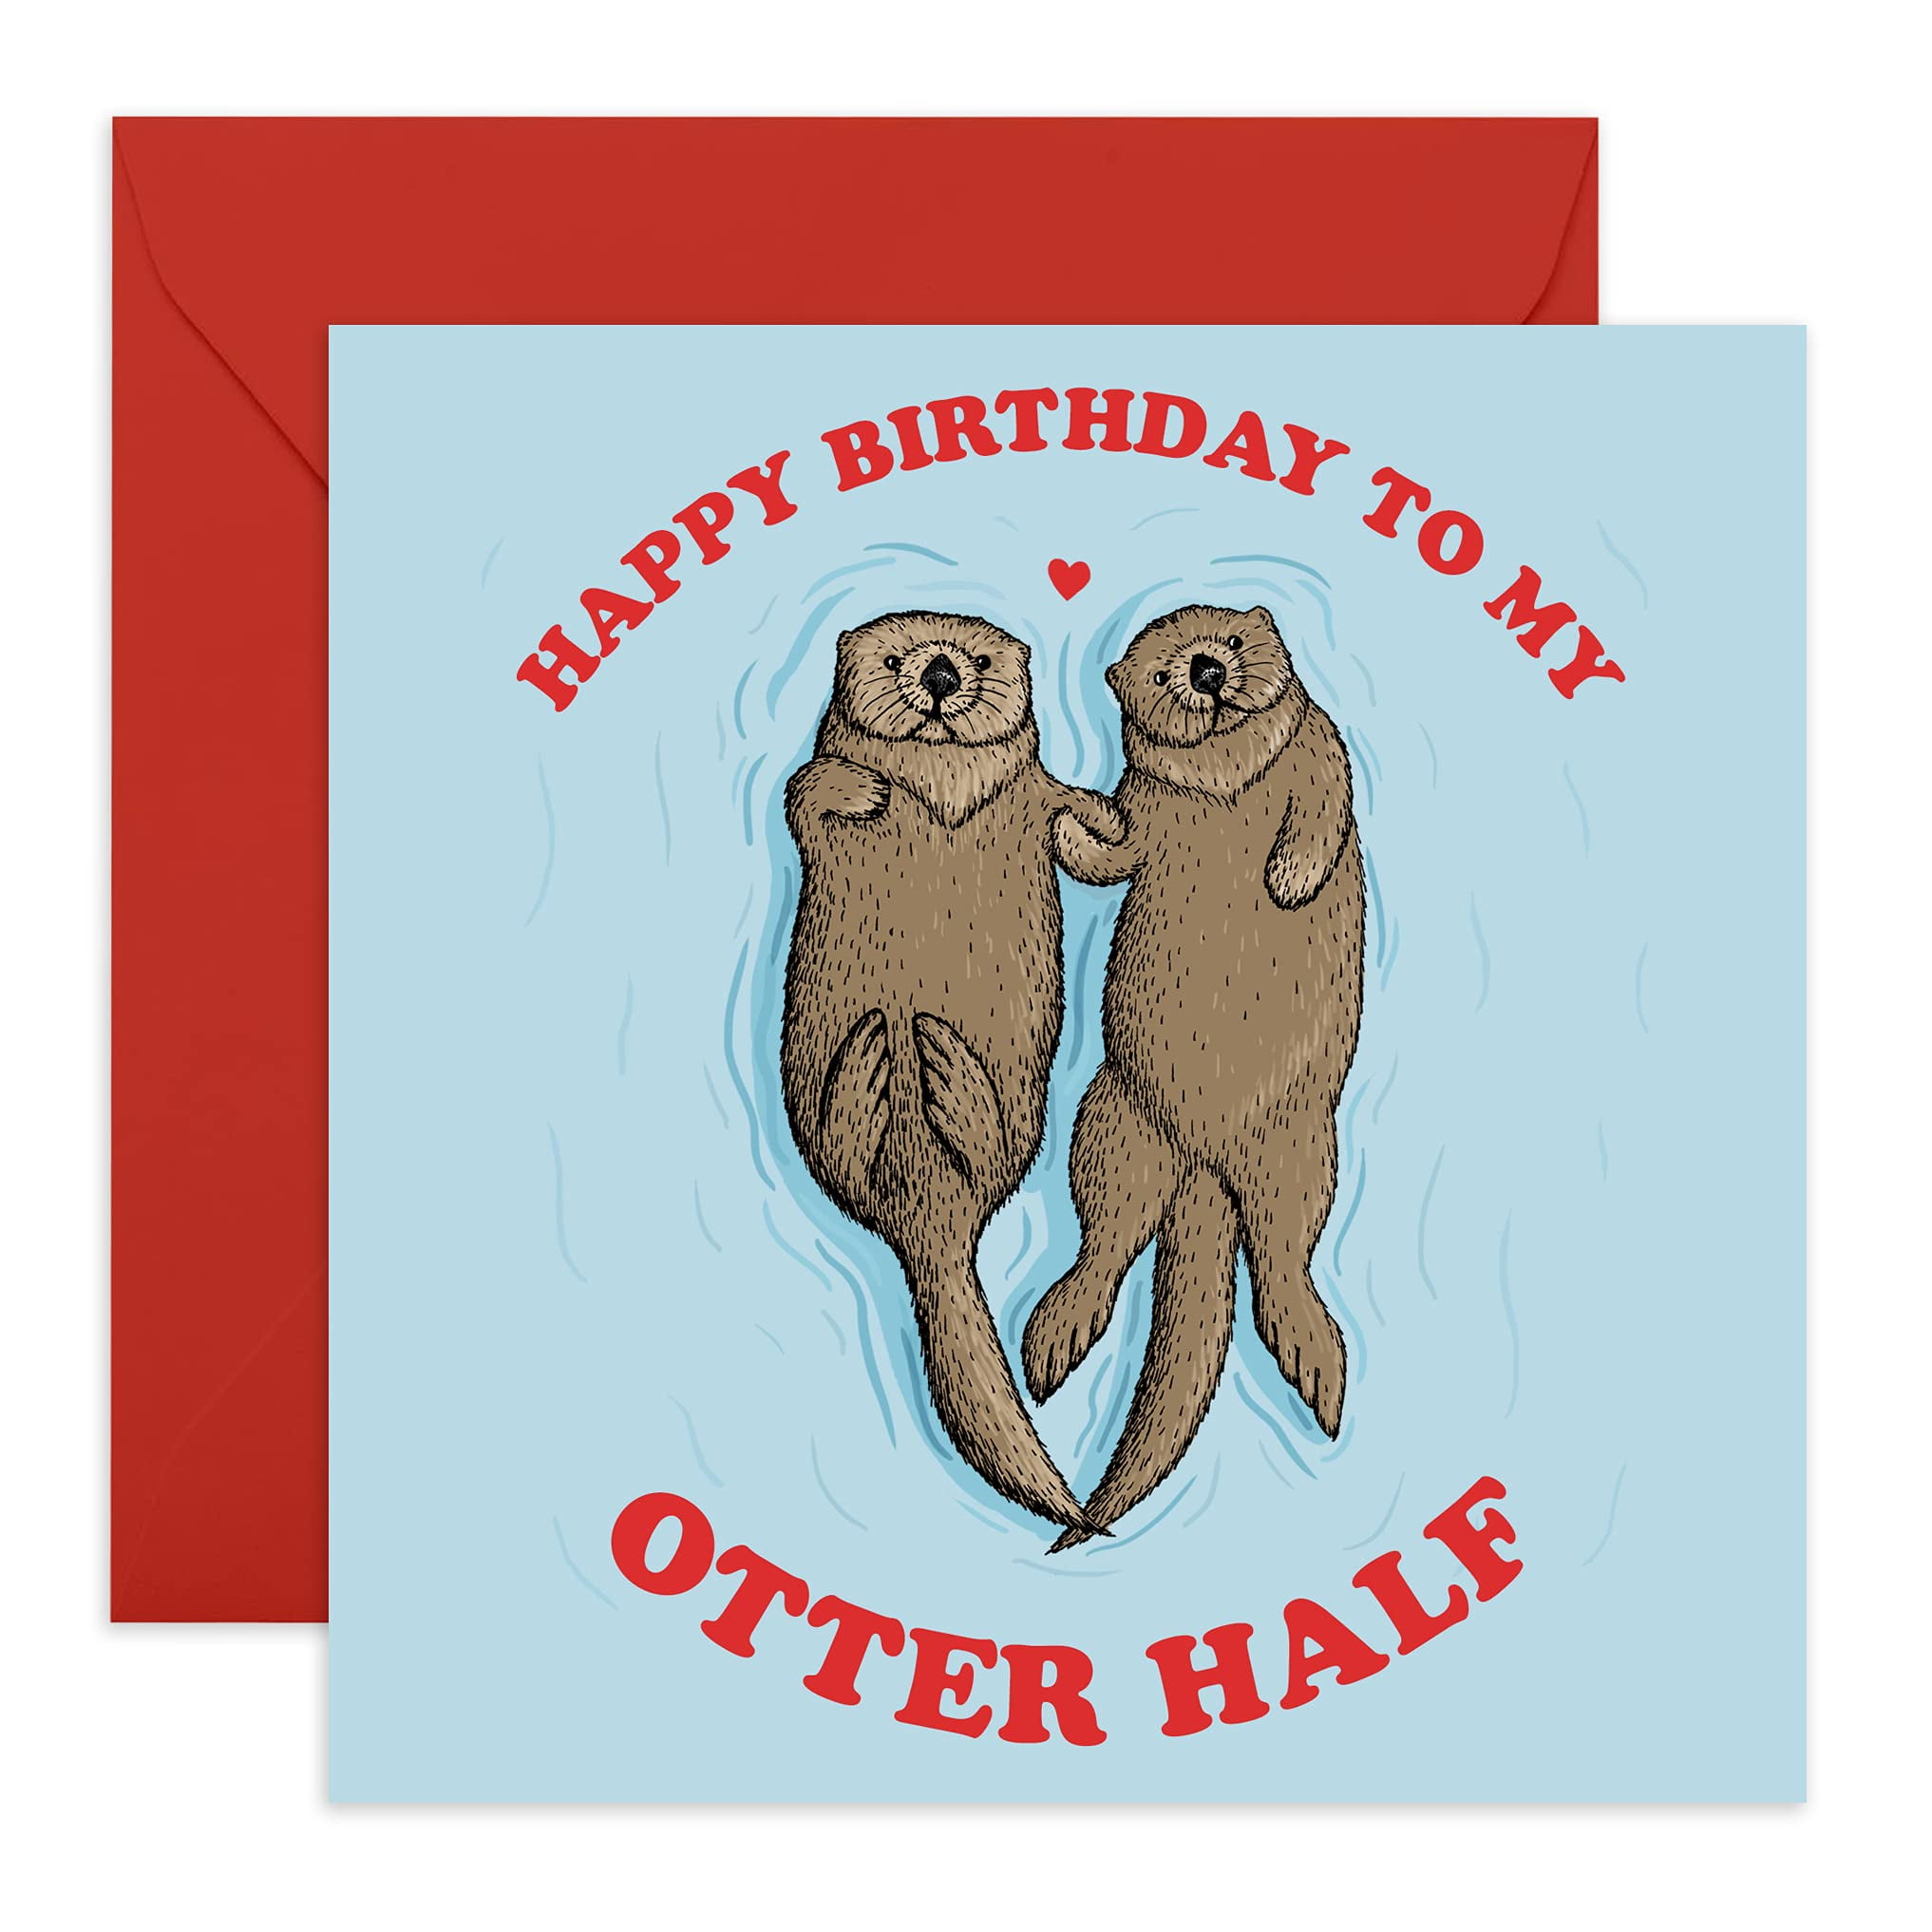 Central 23 - Funny Birthday Card - 'Happy Birthday To My Otter Half' - For  Boyfriend Girlfriend Wife Husband Fiance - Cute Animal Humor - Comes with  Fun Stickers 